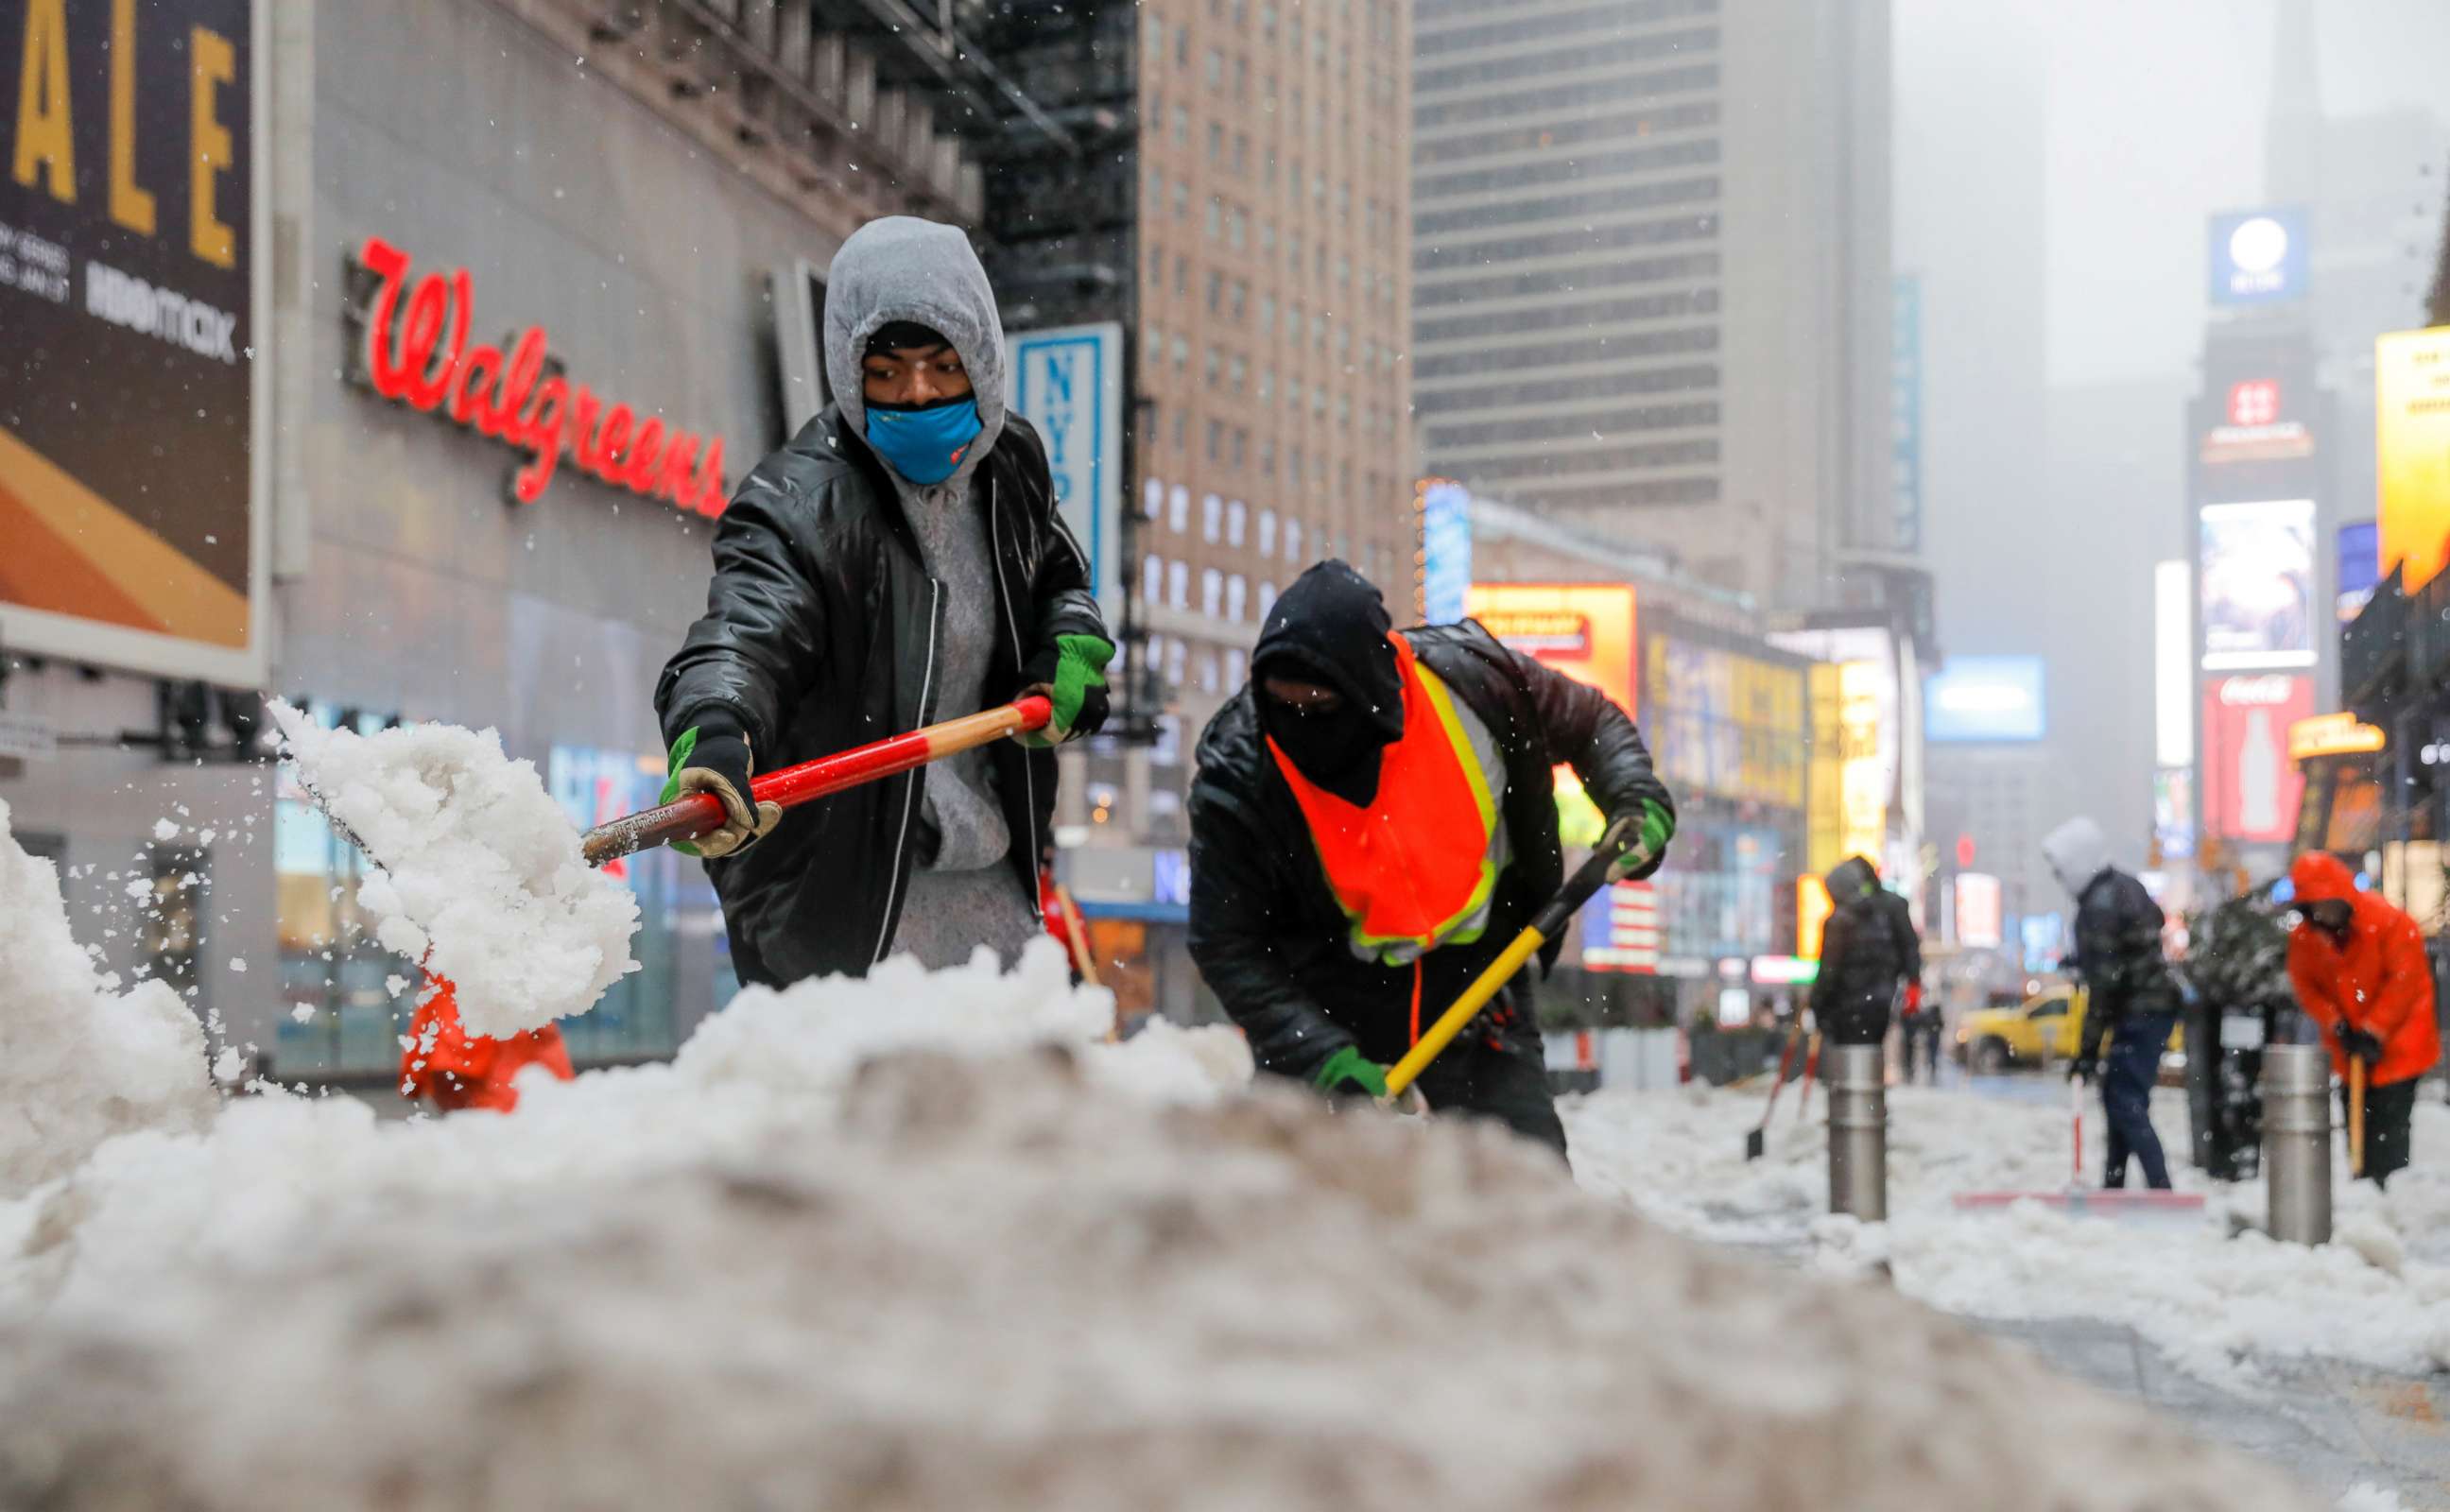 PHOTO: Workers shovel snow in Times Square as more severe weather arrives in Manhattan, Feb. 7, 2021.